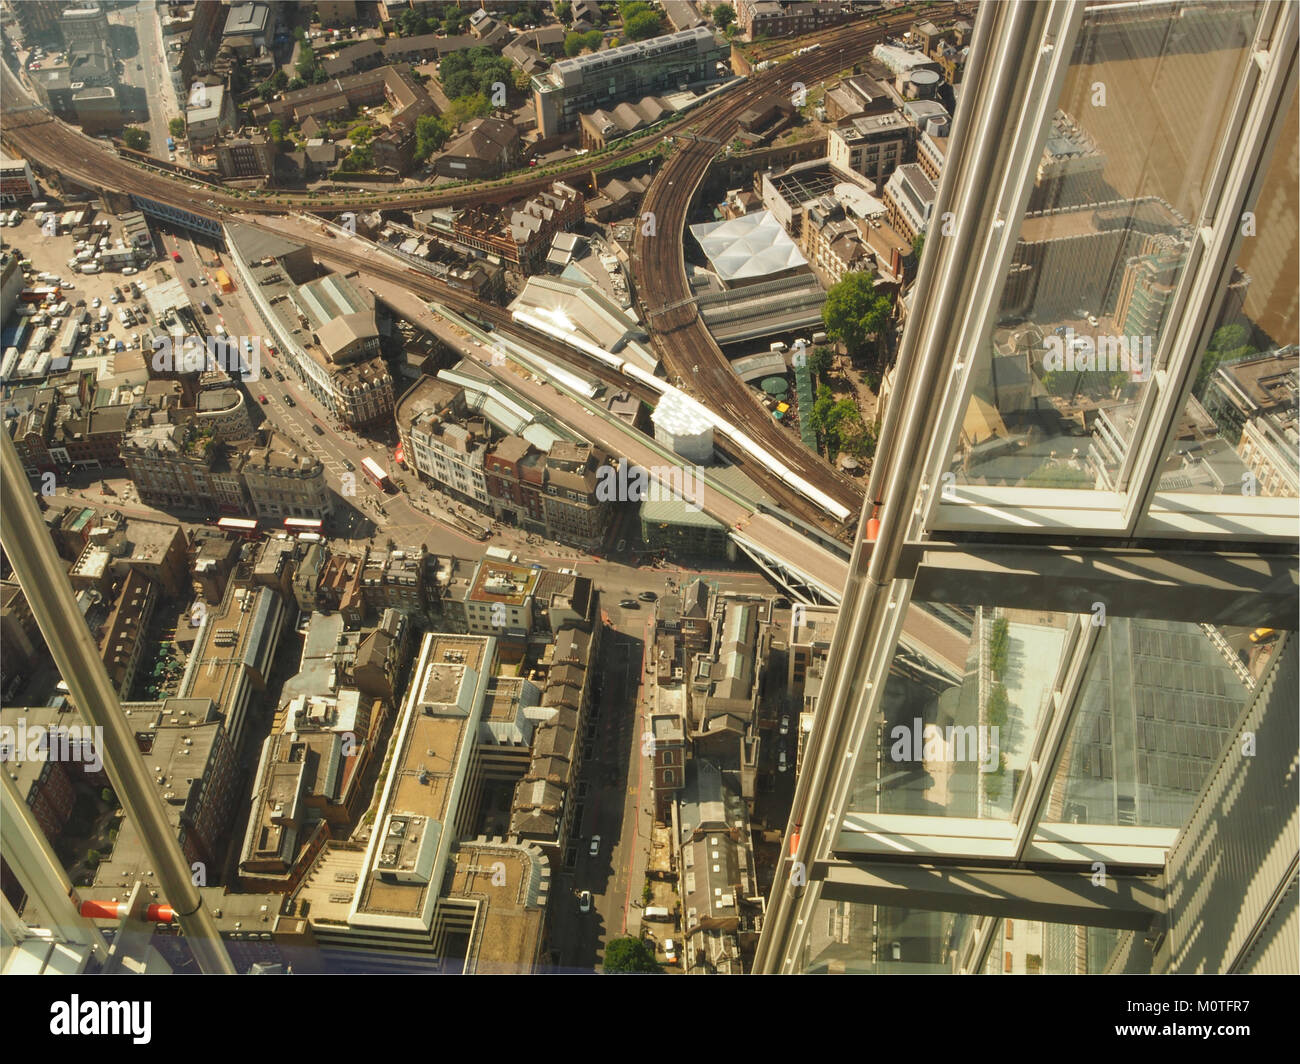 A view looking down from The Shard to the railways going across to Cannon Street station and Waterloo, London Stock Photo